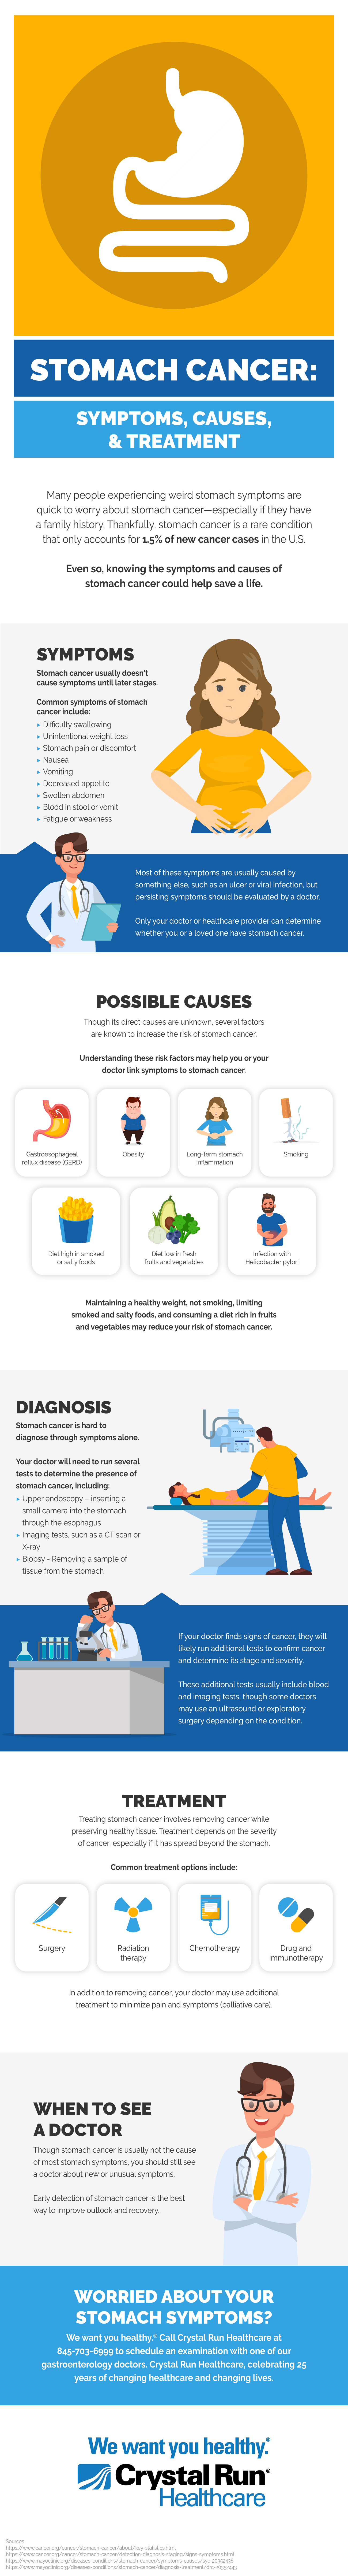 All About Stomach Cancer Infographic